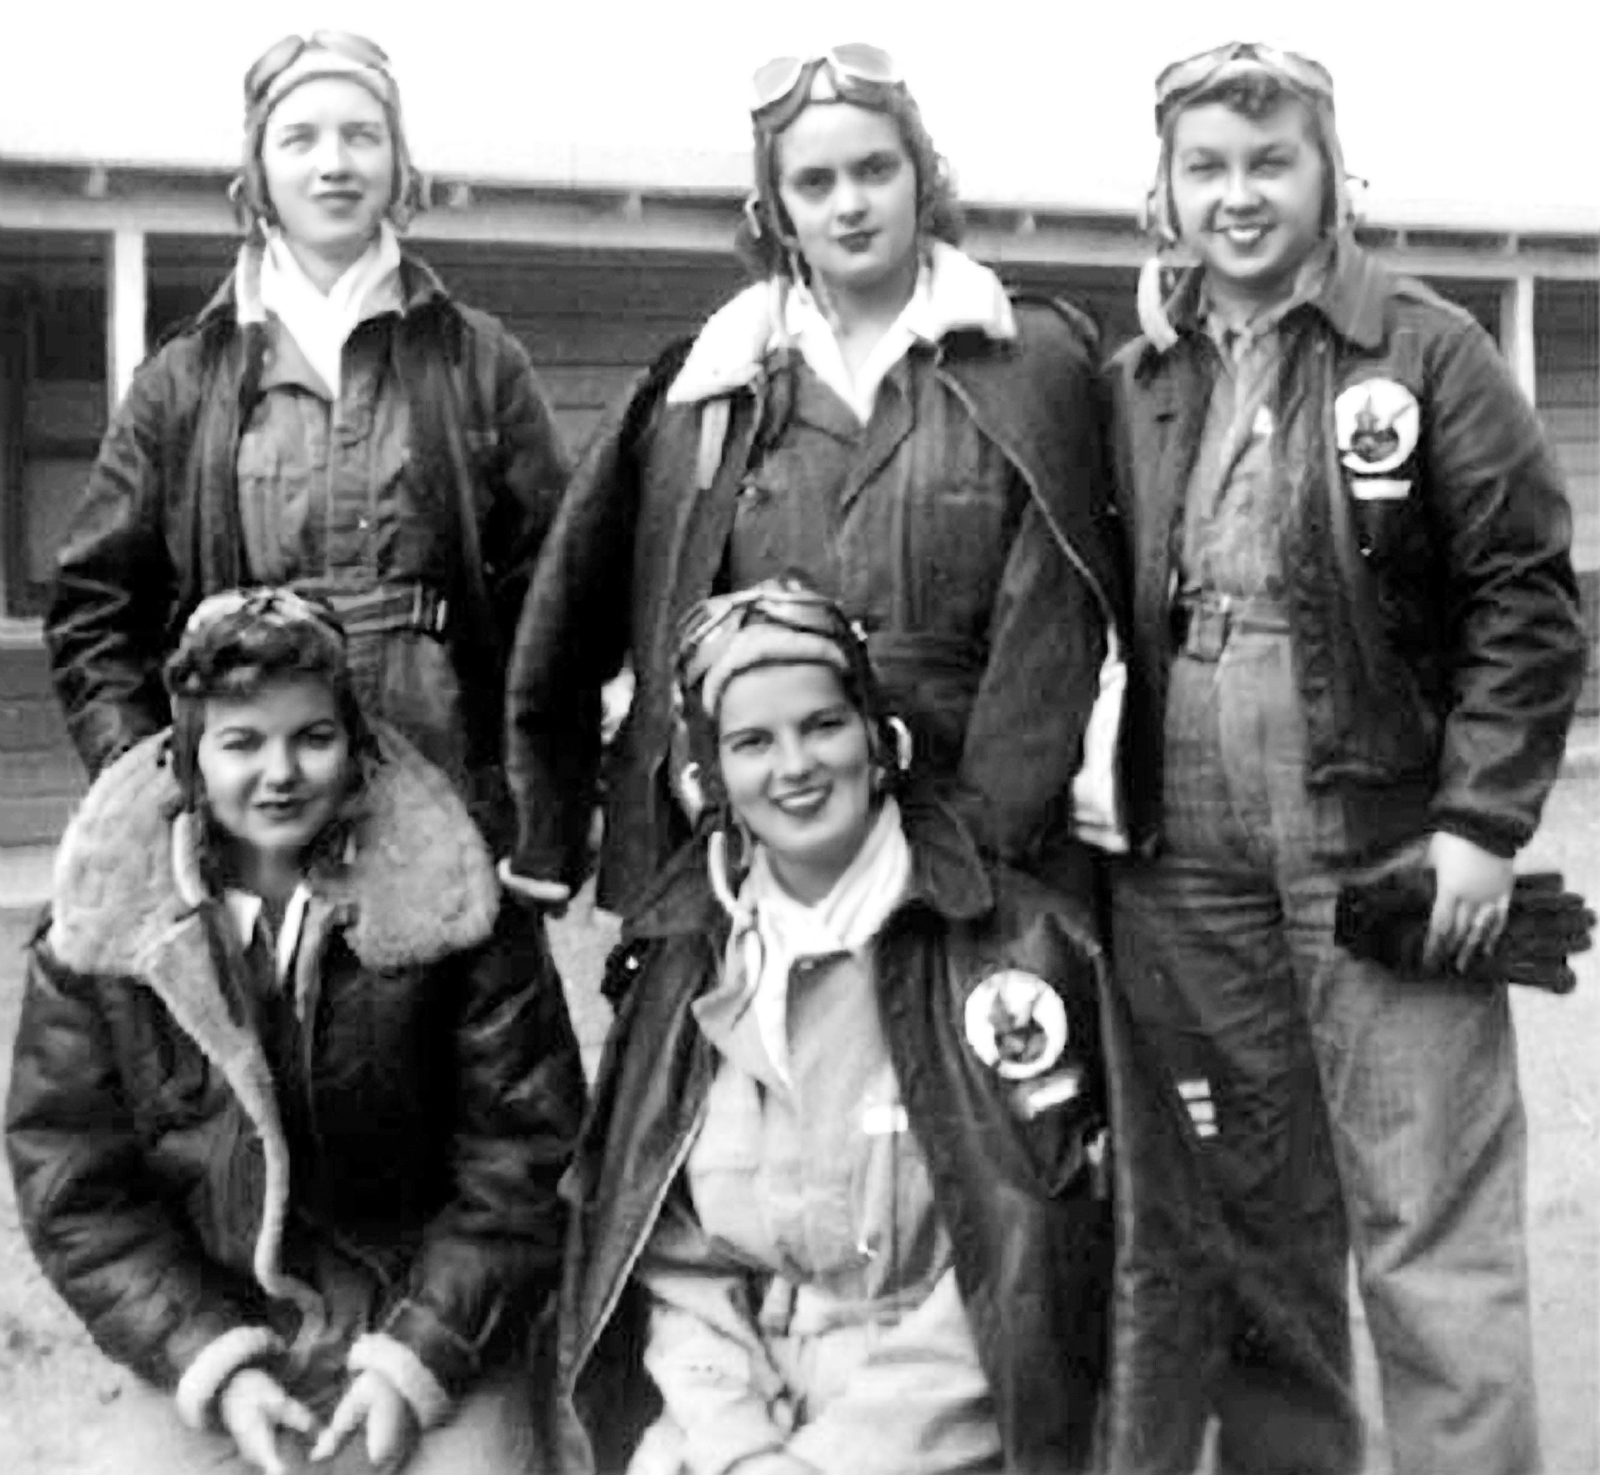 WASP Cadet Class 44-W-4 “Baymates” (barrack mates). Back Row: Dorothy Allen, Jane Baessler, Deanie Bishop. Front Row: Ina Barkley, Jo Naker. Avenger Field, Sweetwater, Texas, United States, Apr 1944